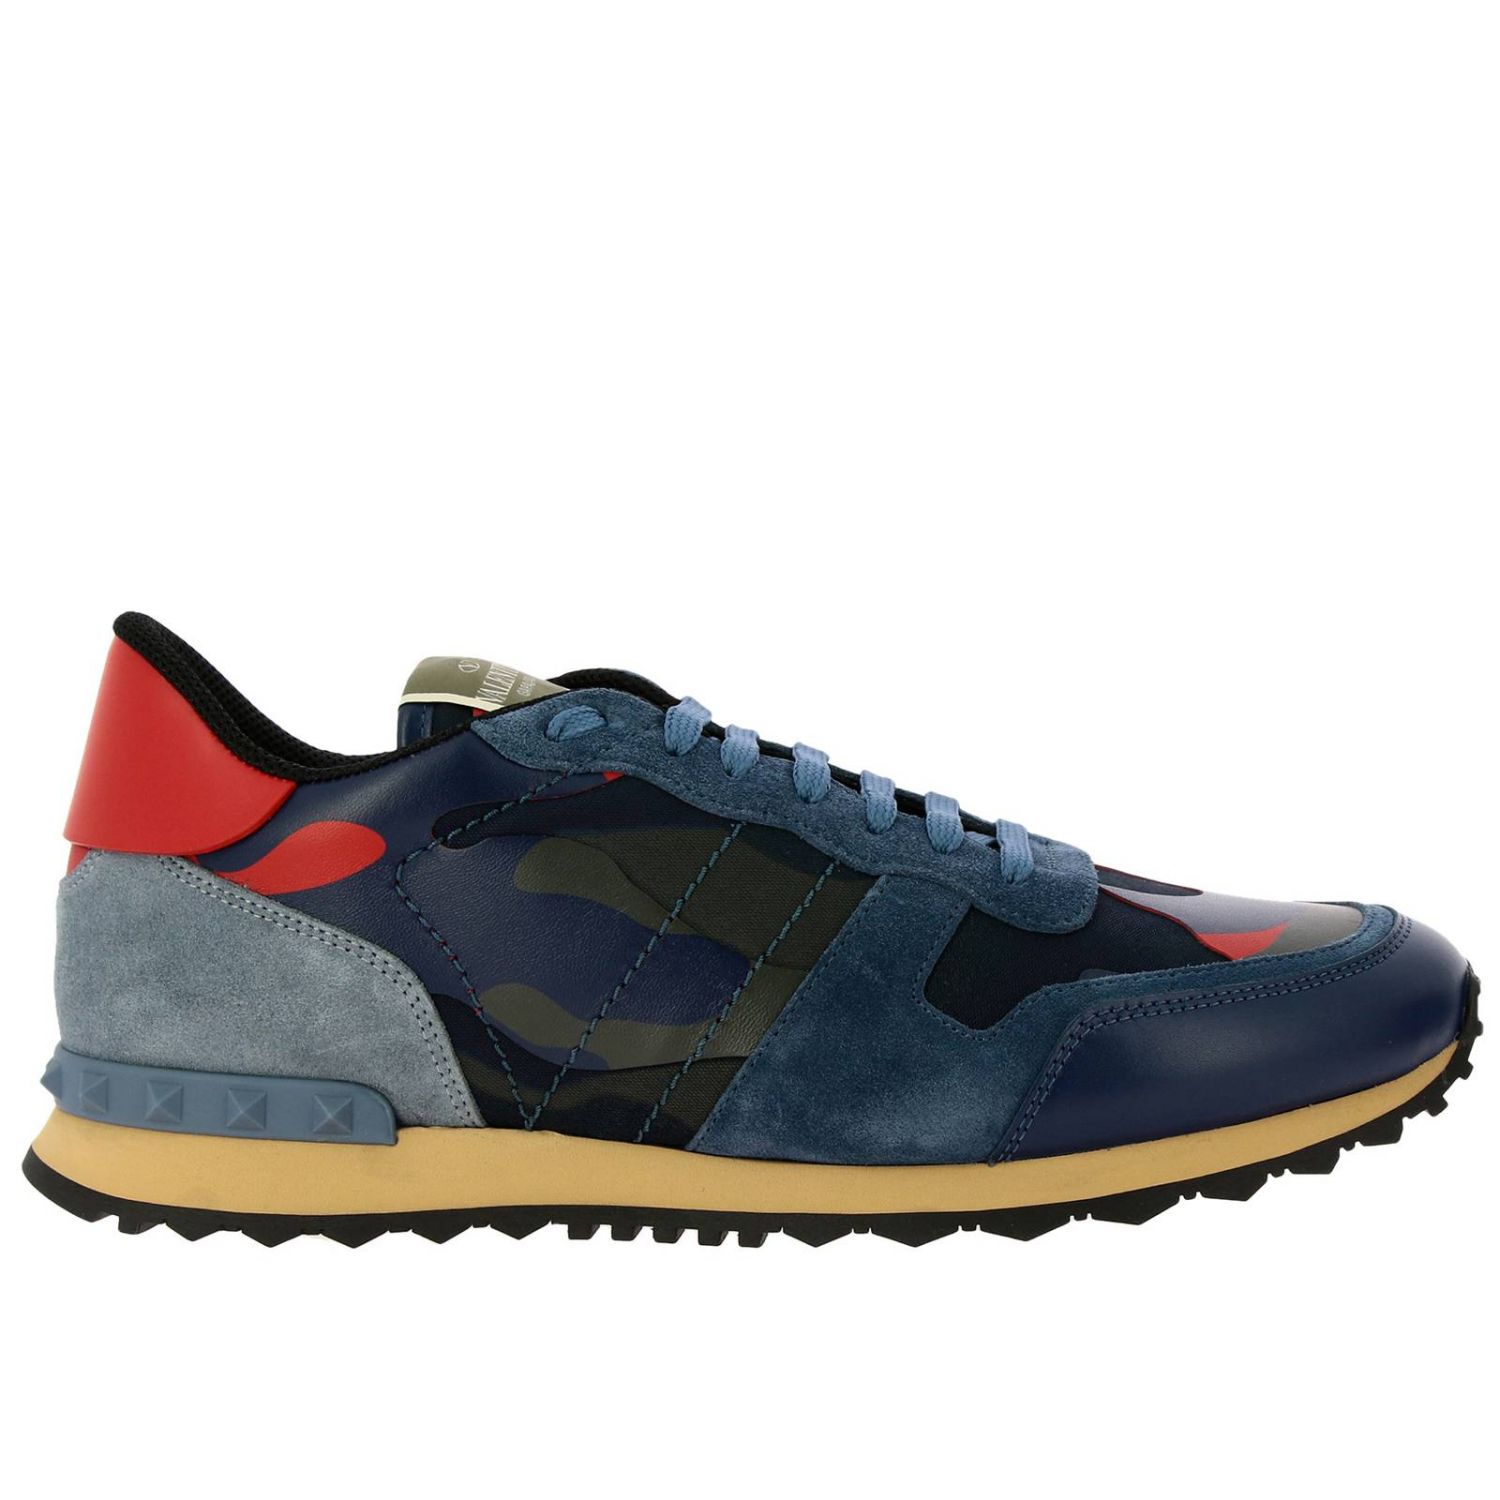 Valentino Garavani Outlet: Rock runner camouflage sneakers in suede and ...